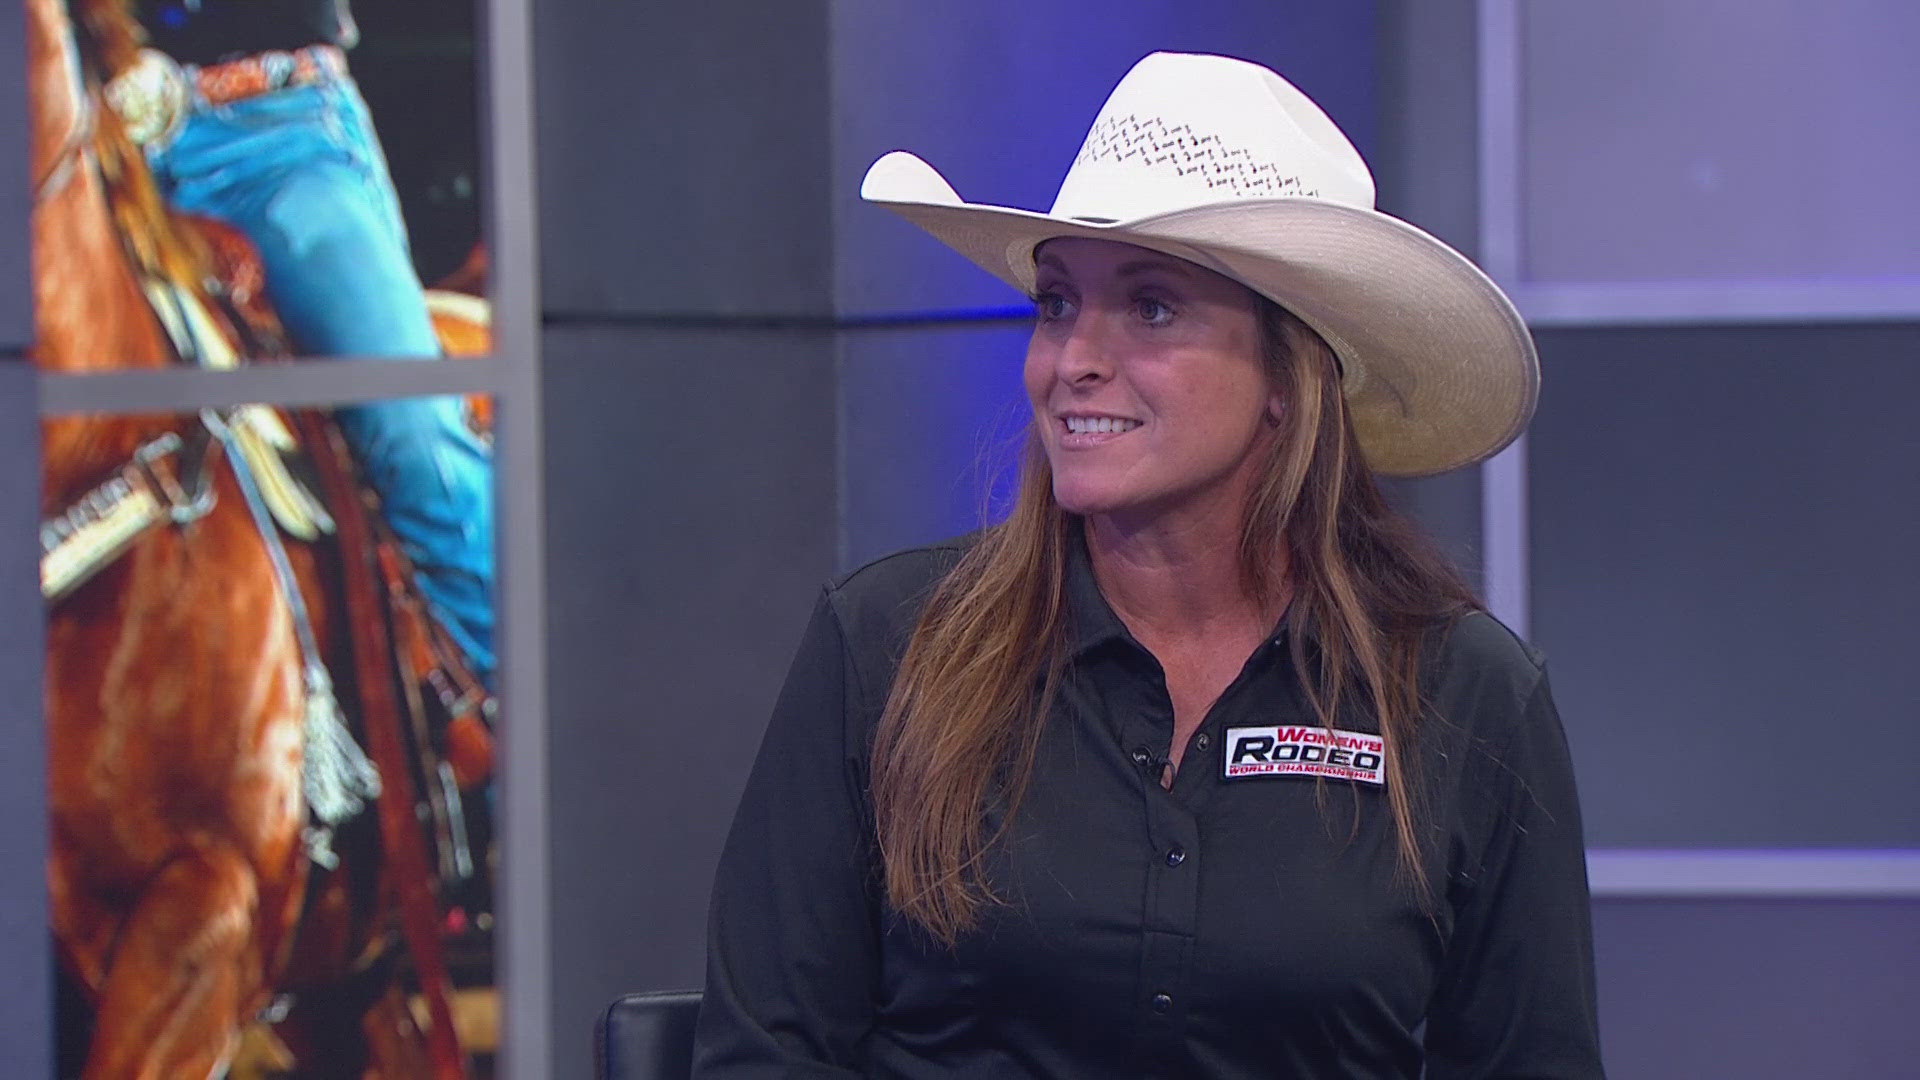 Kate Mote joined WFAA Midday to talk about this week's Women's Rodeo Championship in North Texas.